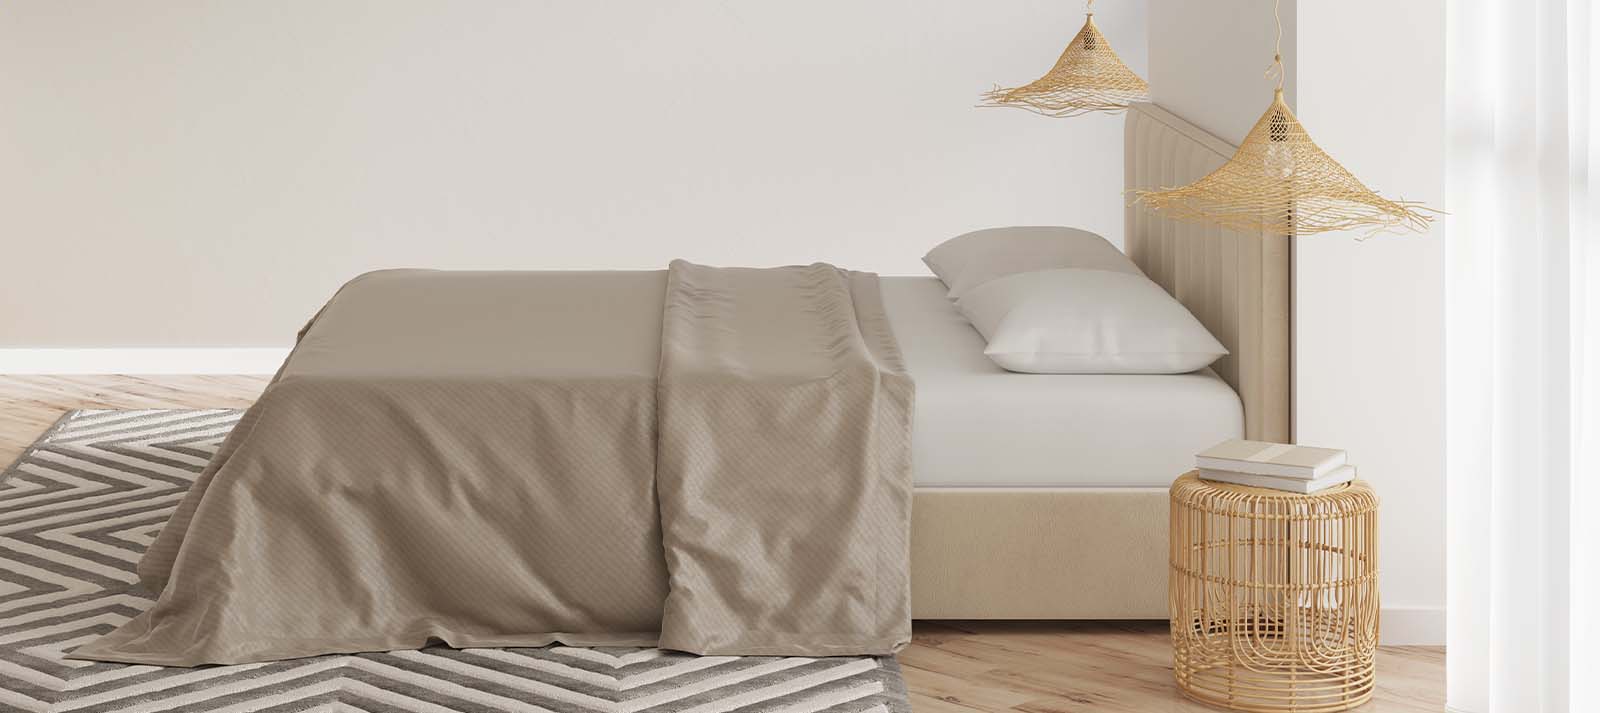 How to choose the perfect sheets